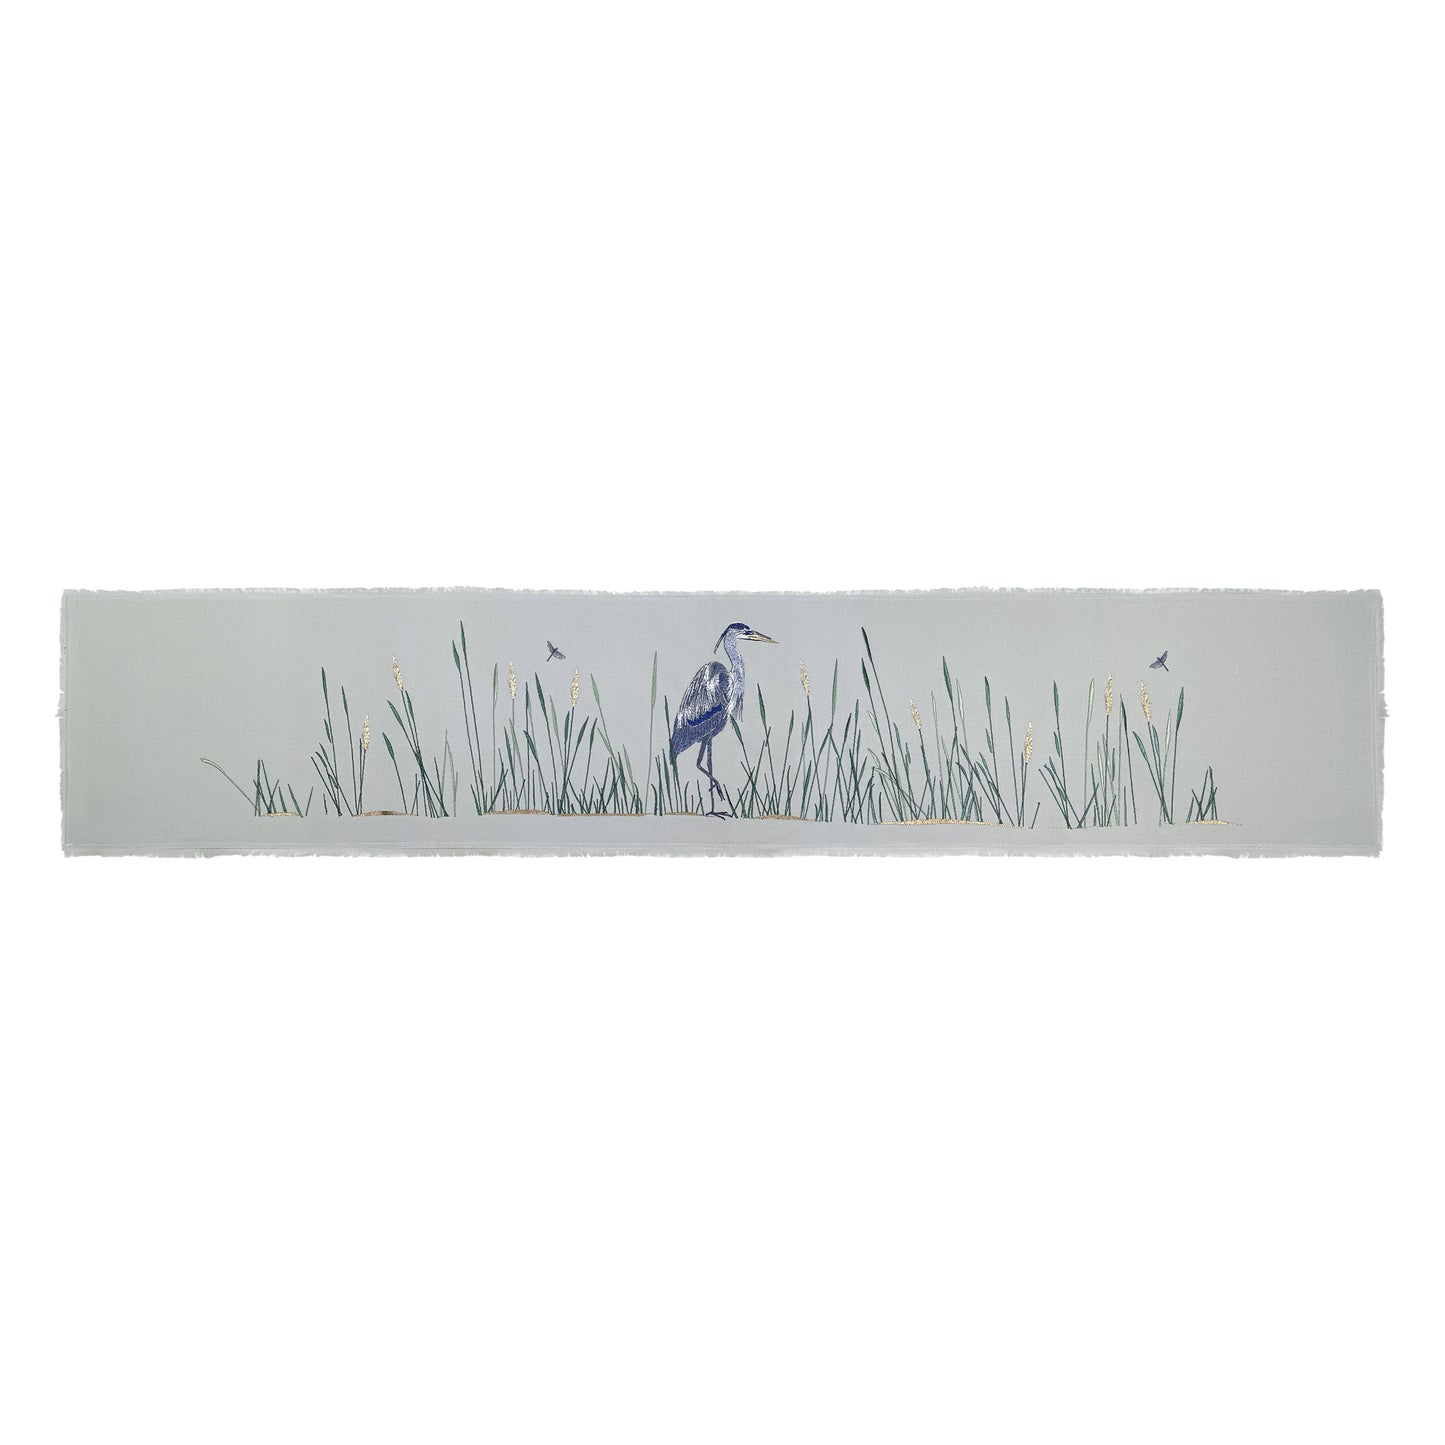 Grey cotton fringed table runner featuring embroidery of Great Blue Heron and reeds. 